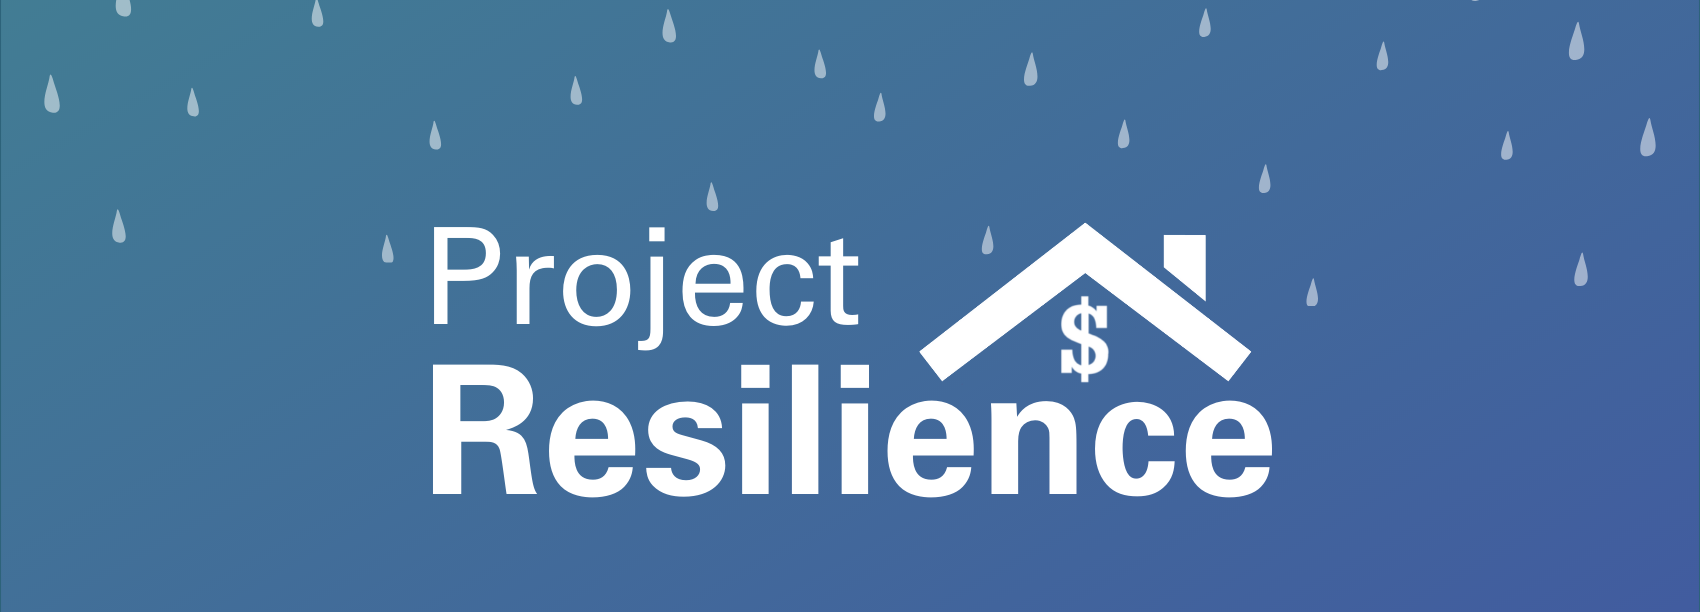 project resilience